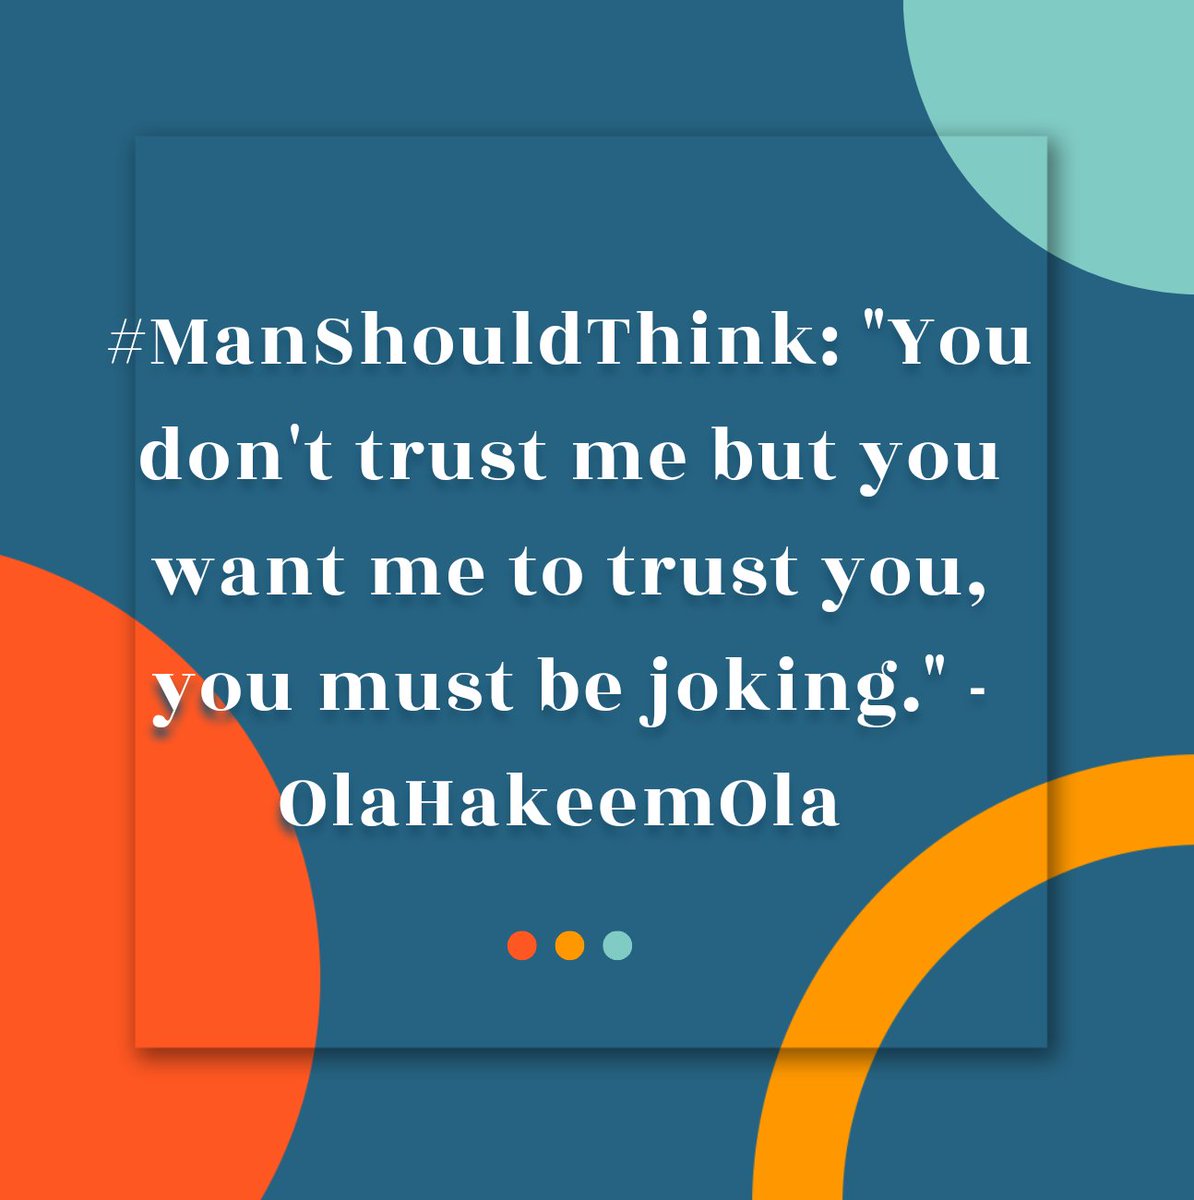 #ManShouldThink by #OlaHakeemOla on #trust between 2 persons

#lifestyles #lifecoaching #lifelessons #lifequotes #quotestoliveby #quotesdaily #wisewords #wisequotes #life  #wisdomquotes #ThursdayMotivation